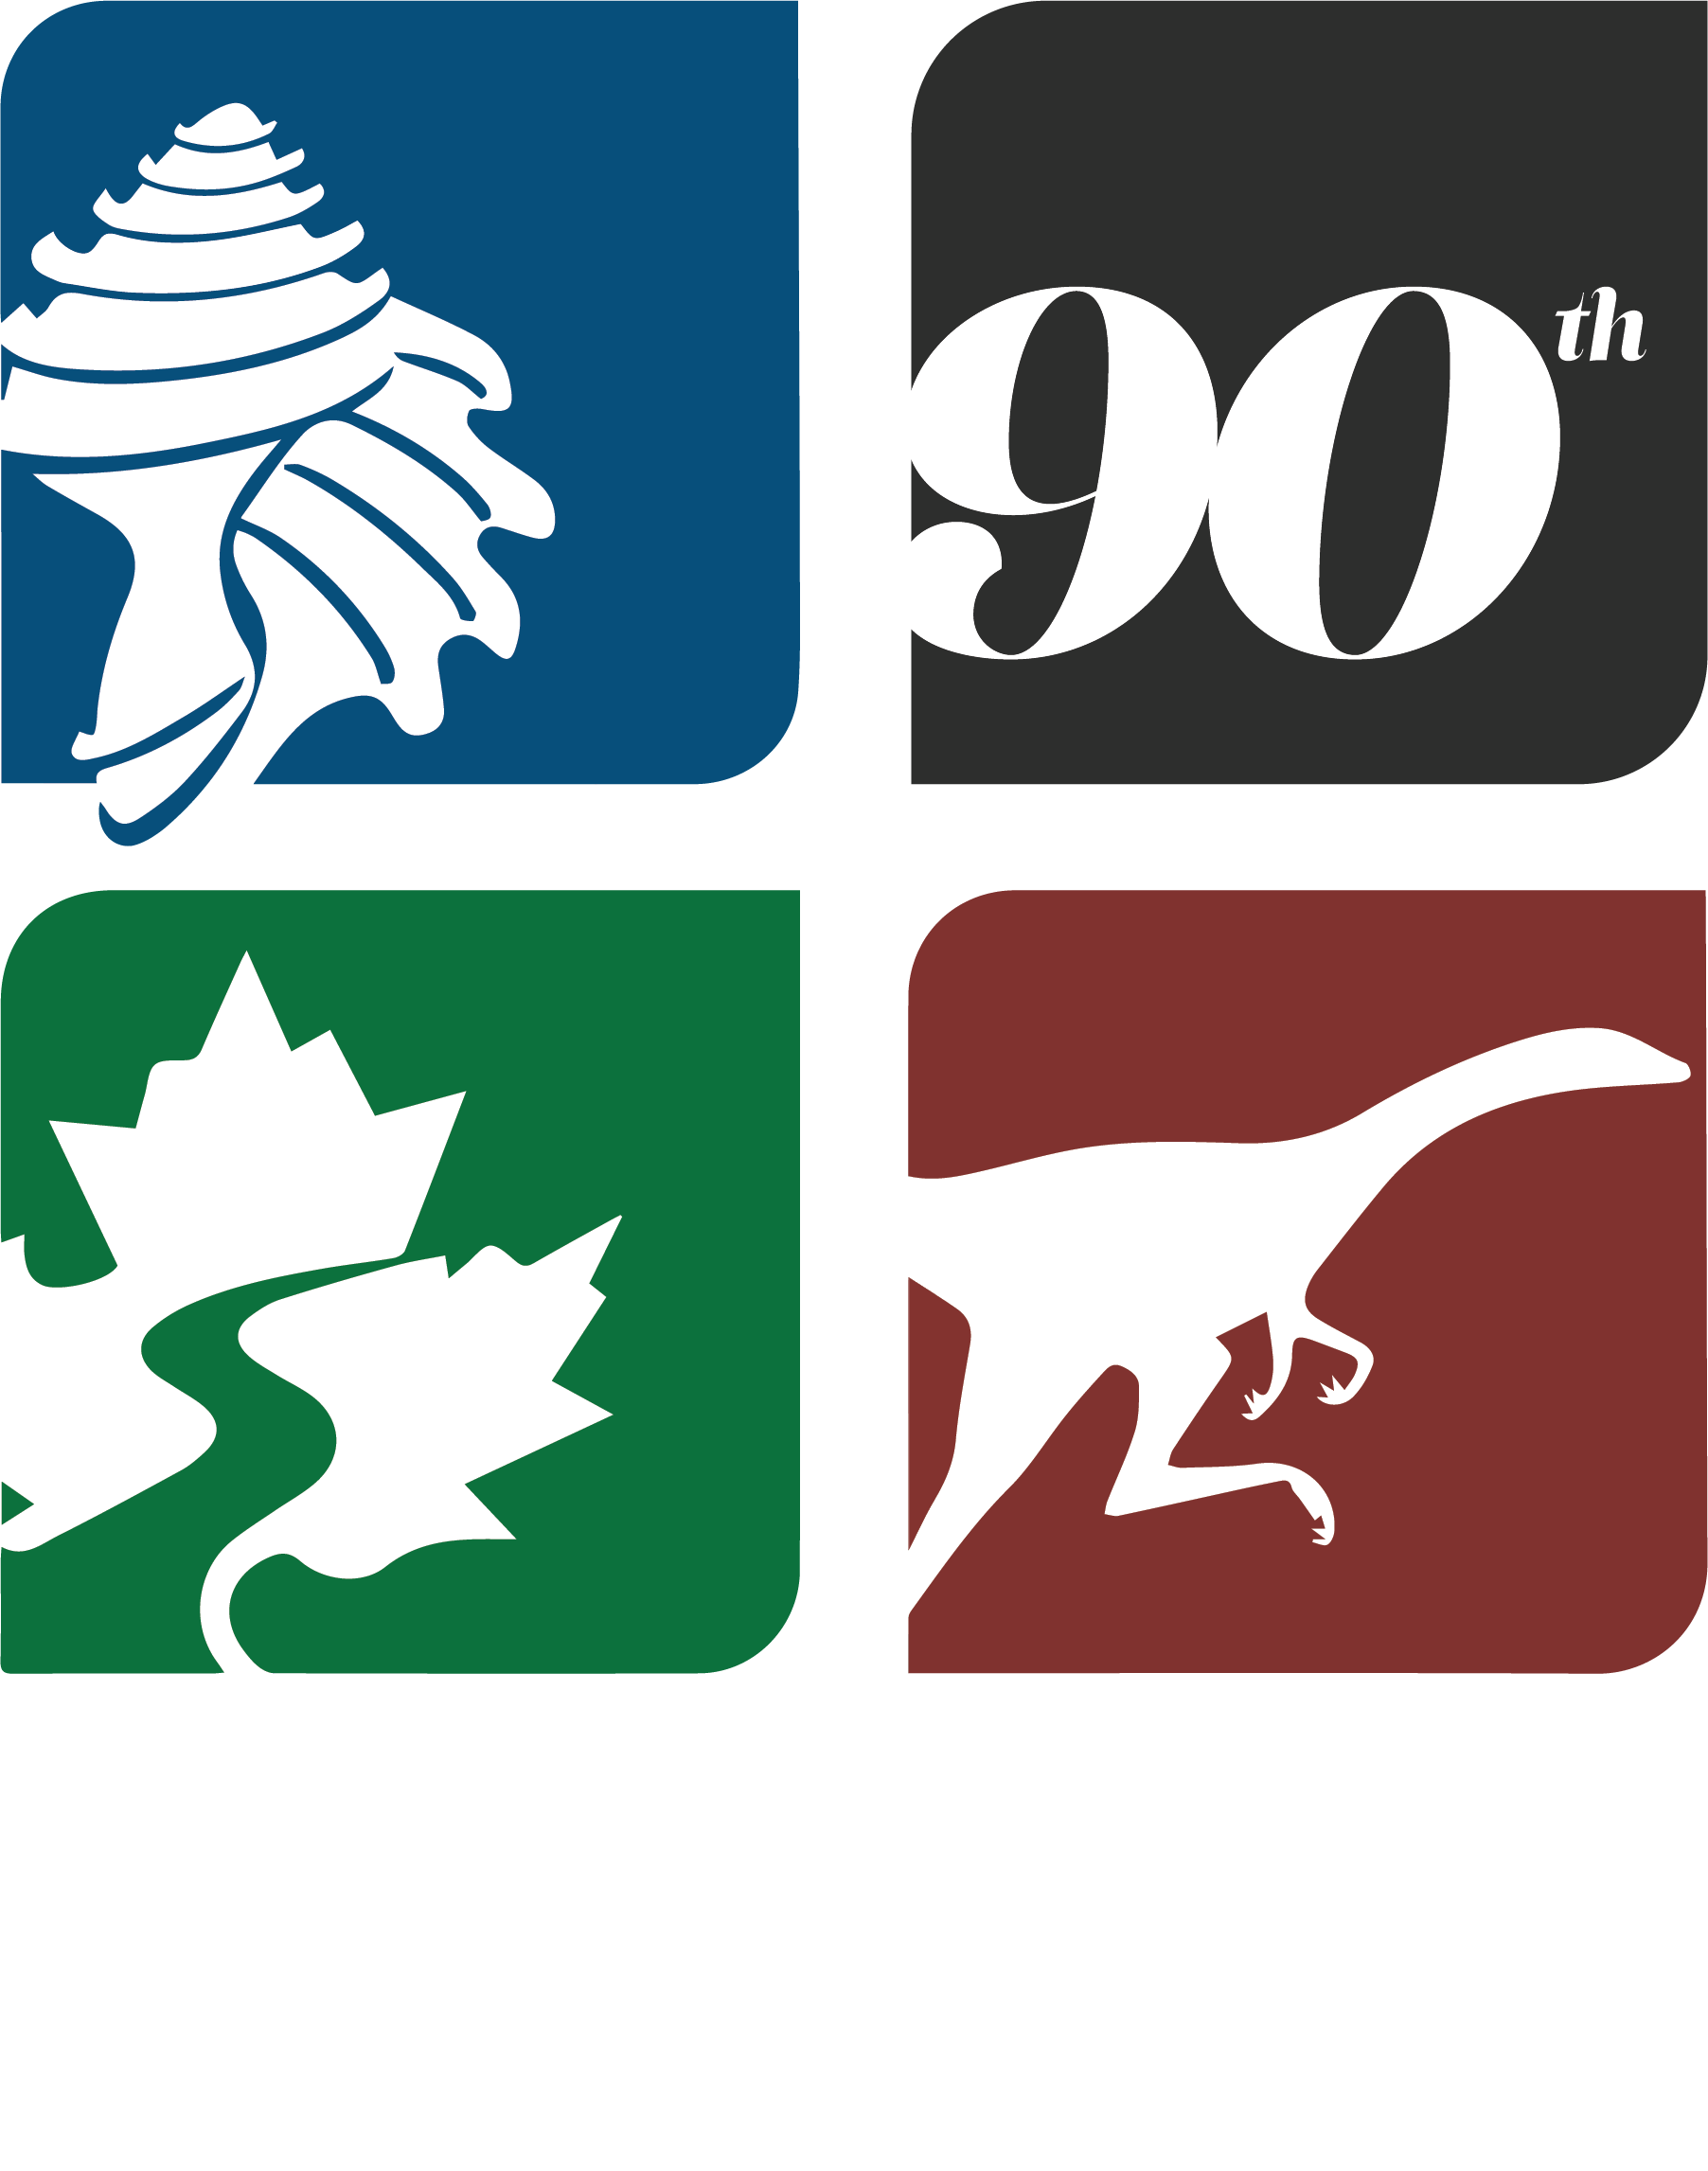 Paleontological Research Institution logo